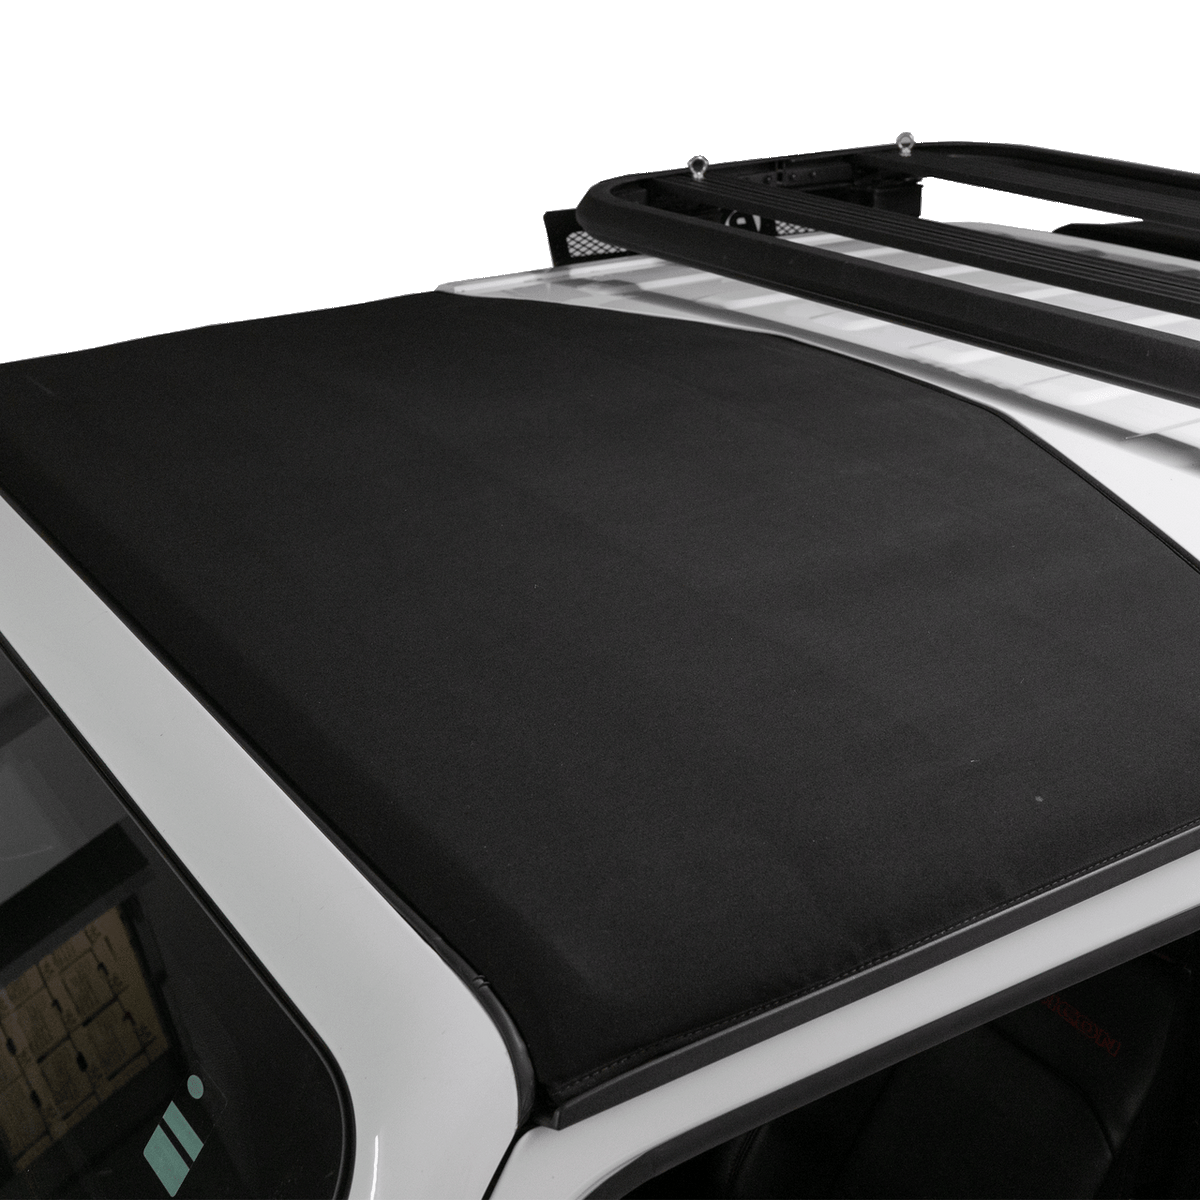 Bestop Retractable Sunshade installed on a white vehicle, showcasing black UV-resistant mesh fabric and no-drill installation.